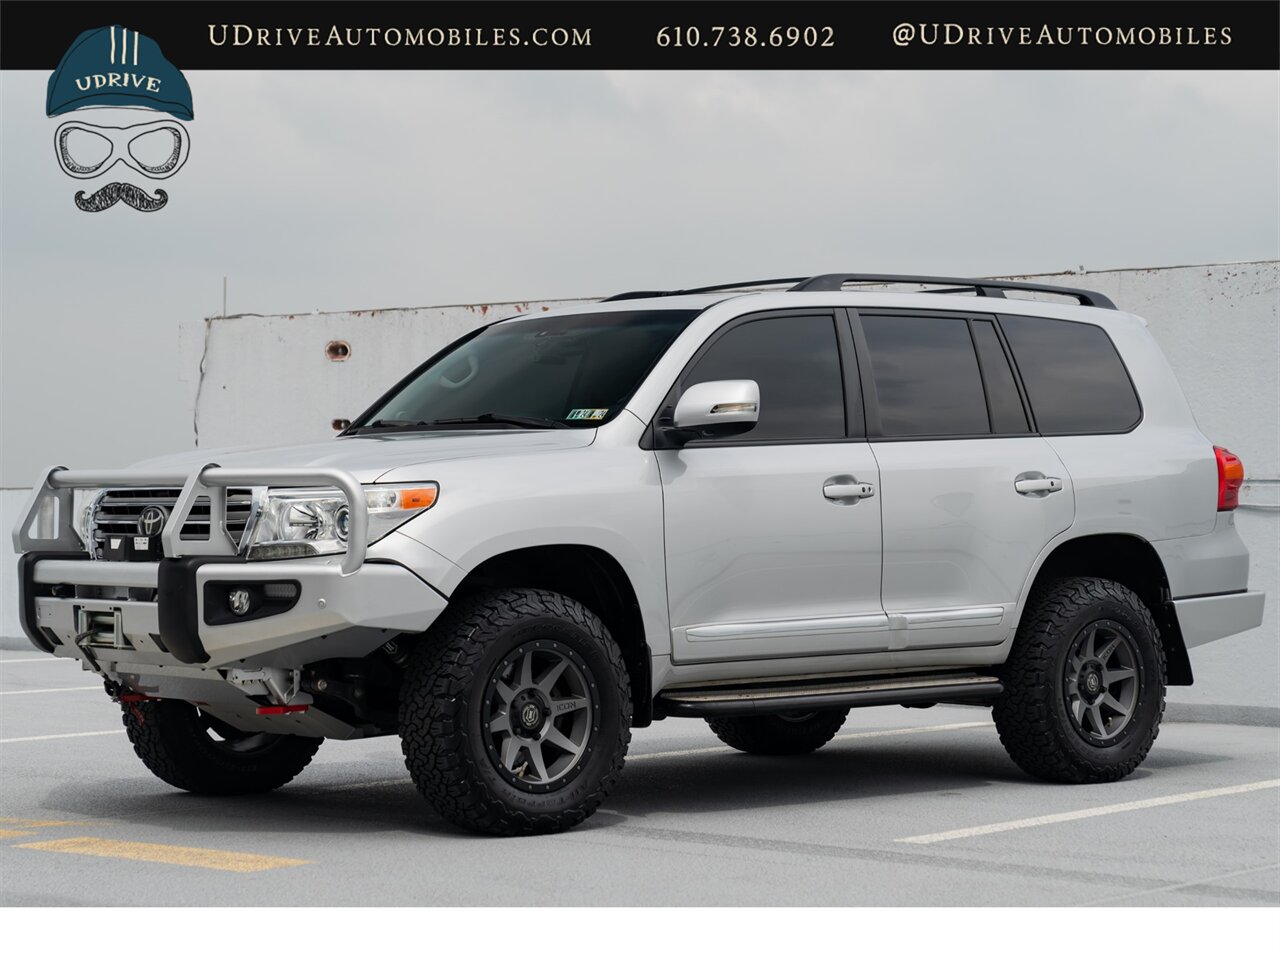 2014 Toyota Land Cruiser LIVE ON BRING A TRAILER  Overland Build Harrop SuperCharger Icon ARB No Expense Spared - Photo 15 - West Chester, PA 19382